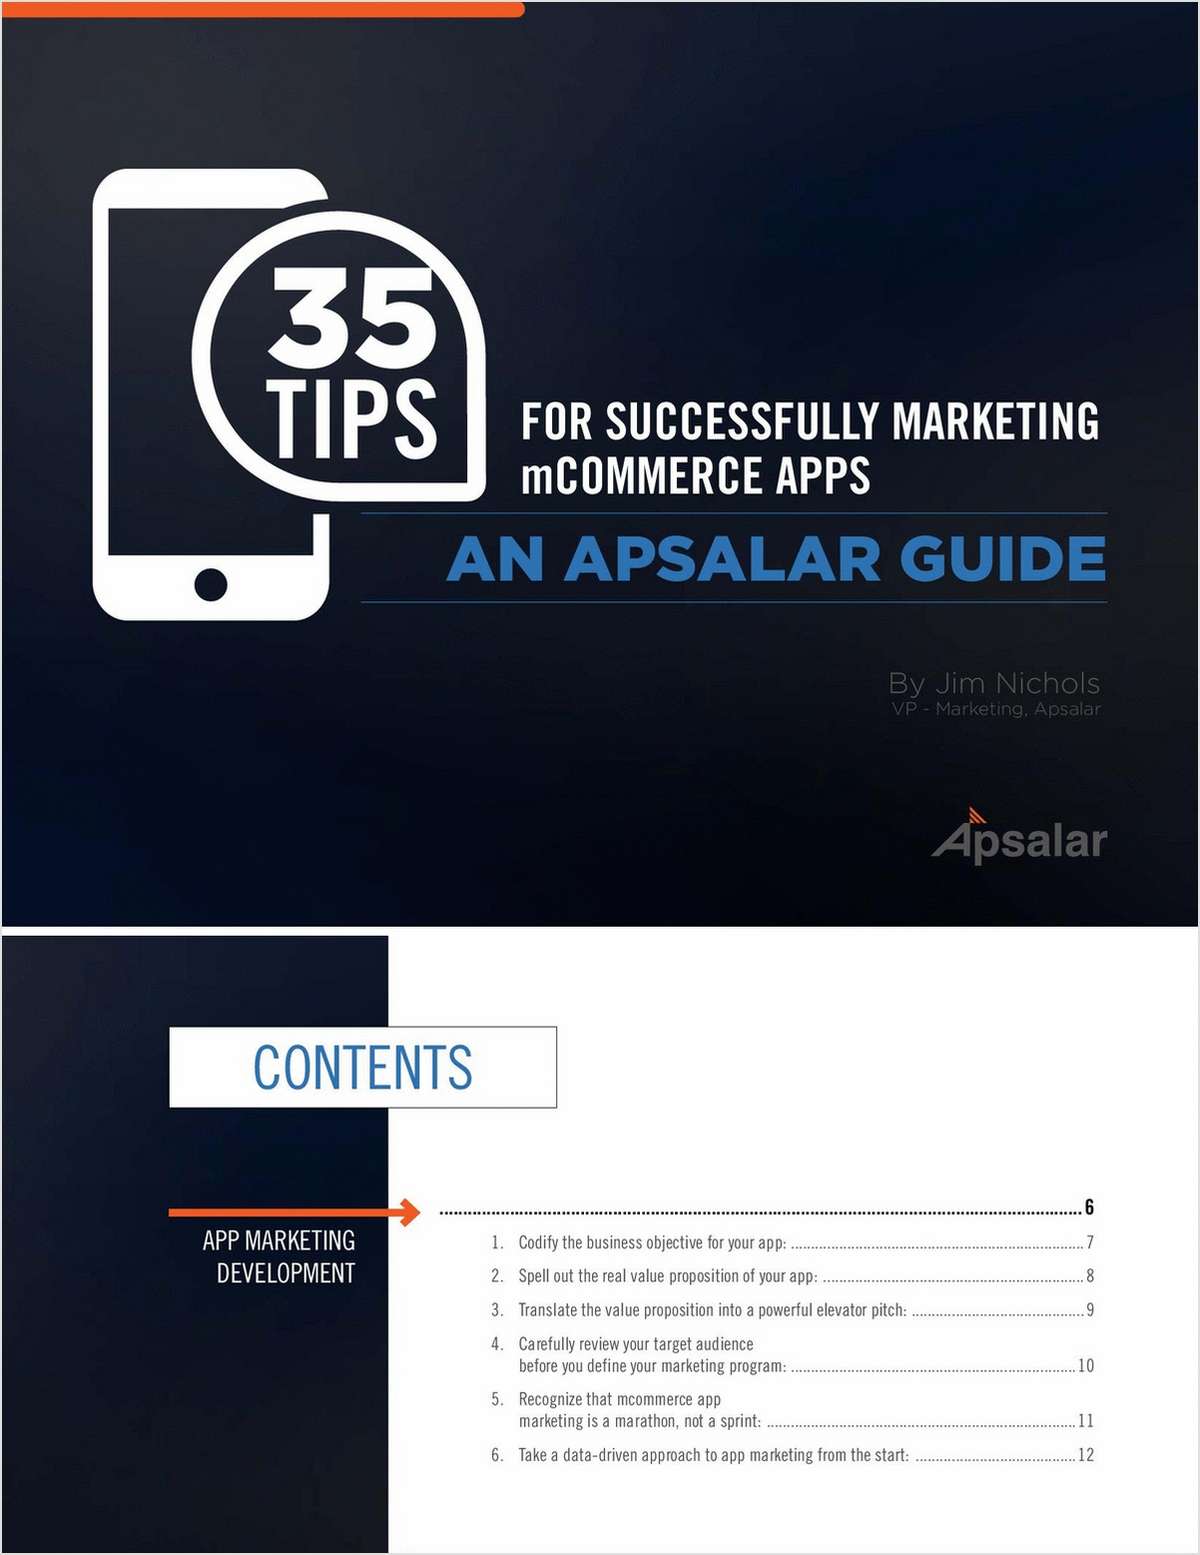 35 Tips for Marketing iPhone and Android mCommerce Apps